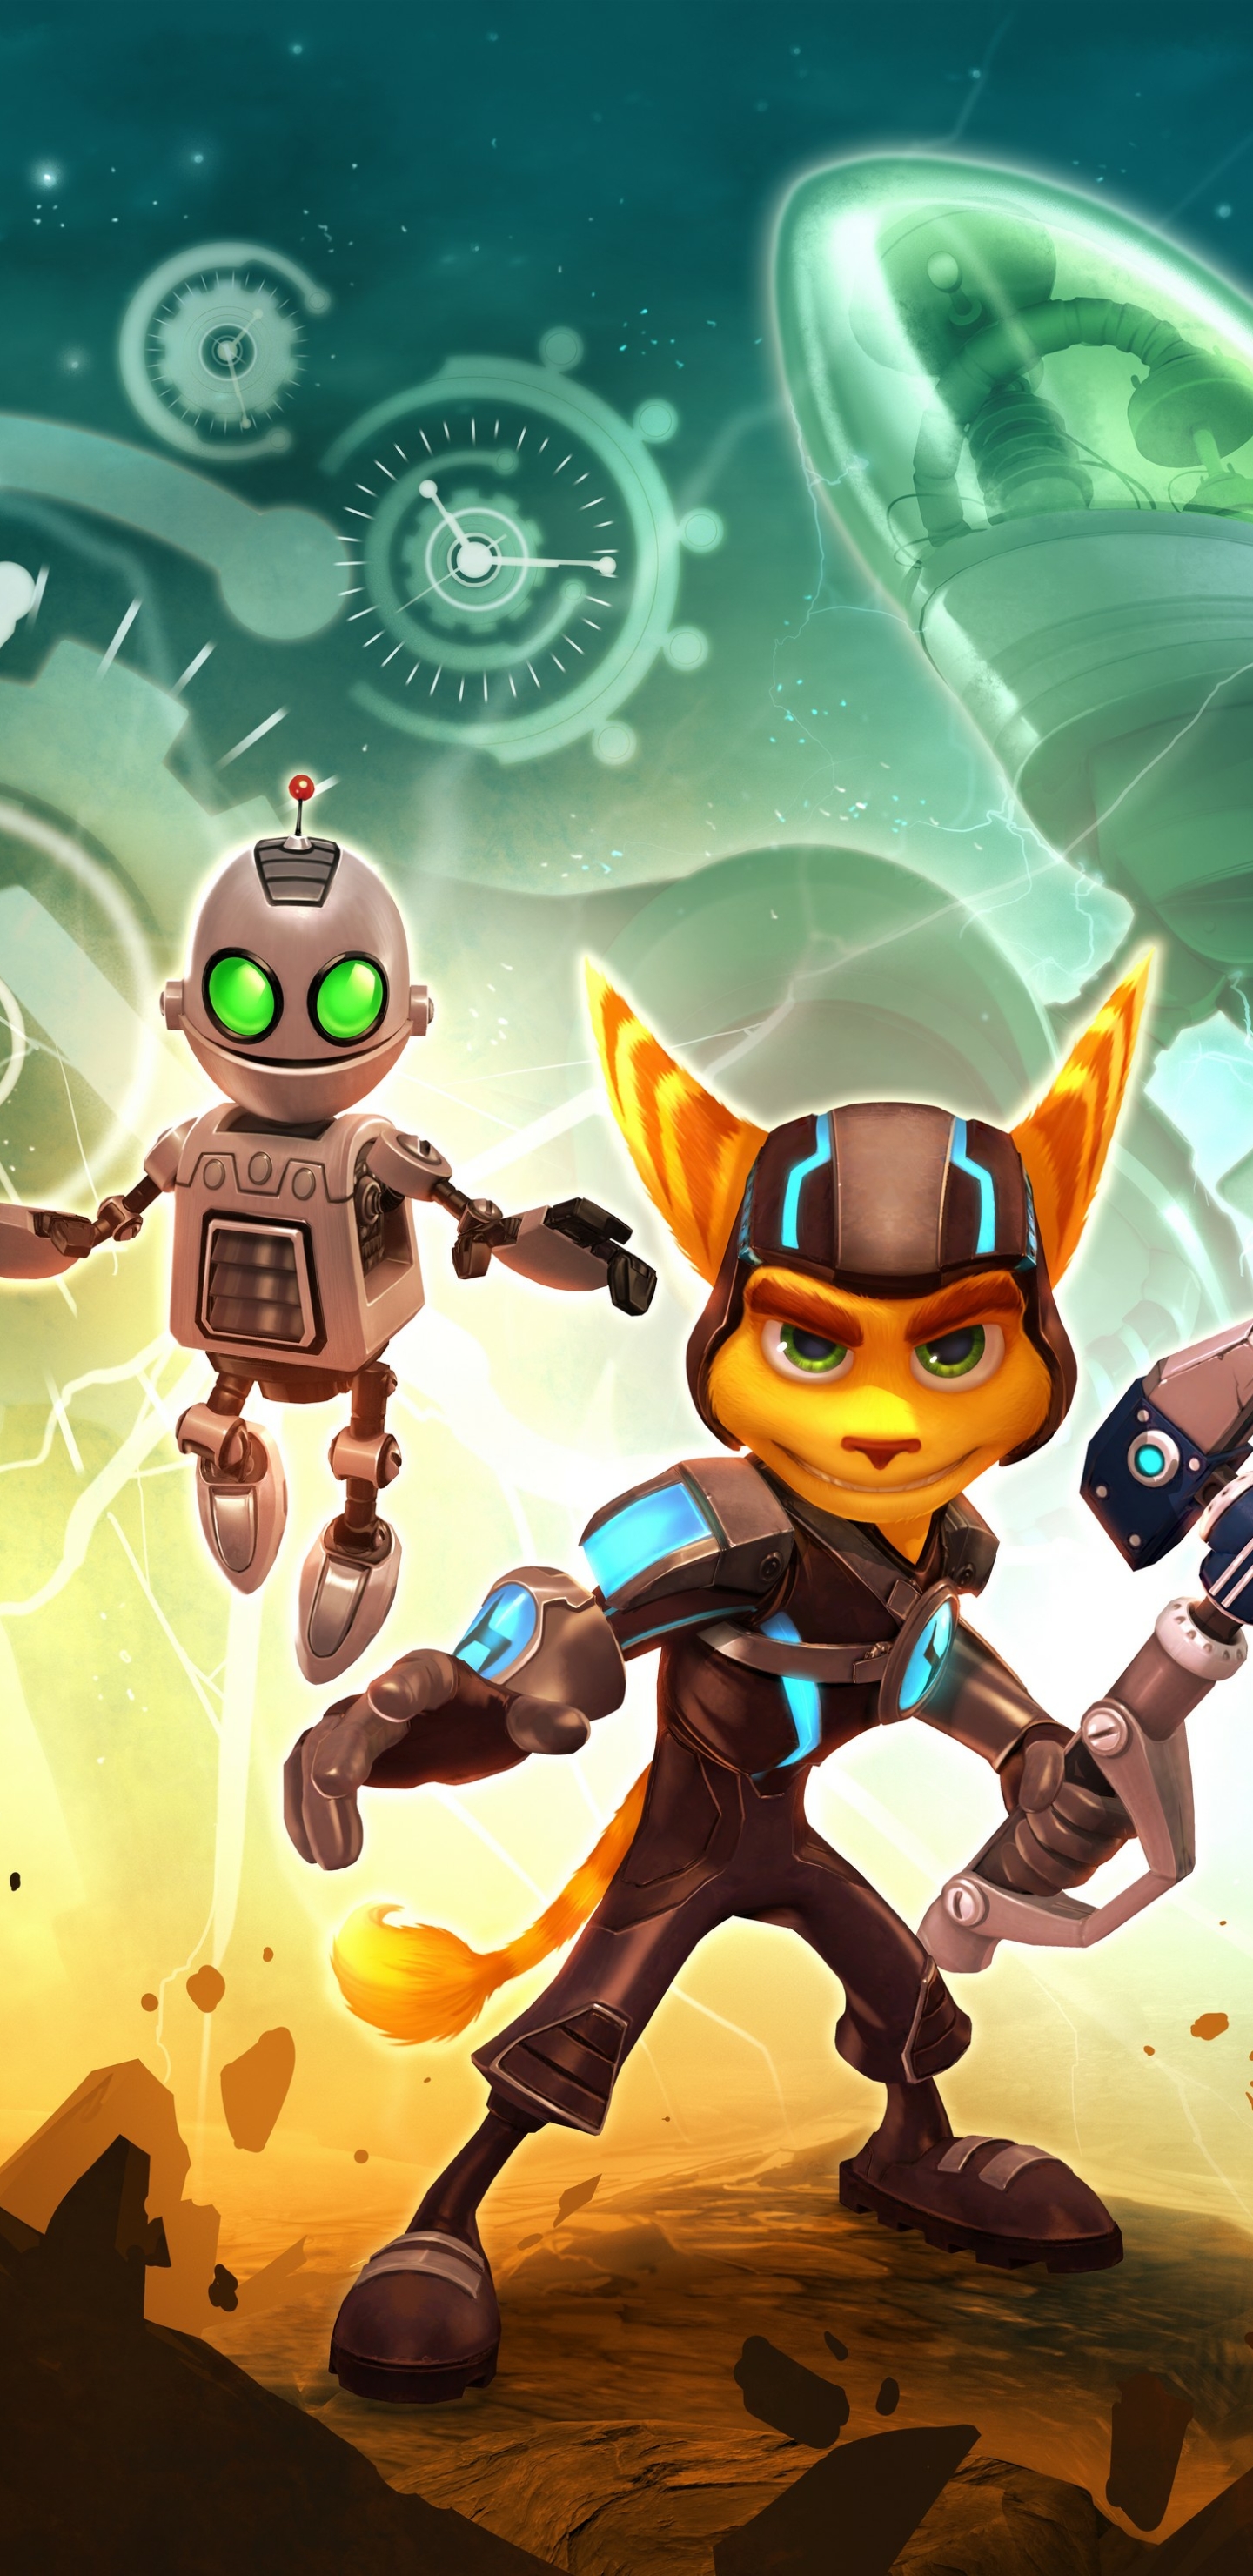 video game, ratchet & clank future: a crack in time, ratchet & clank